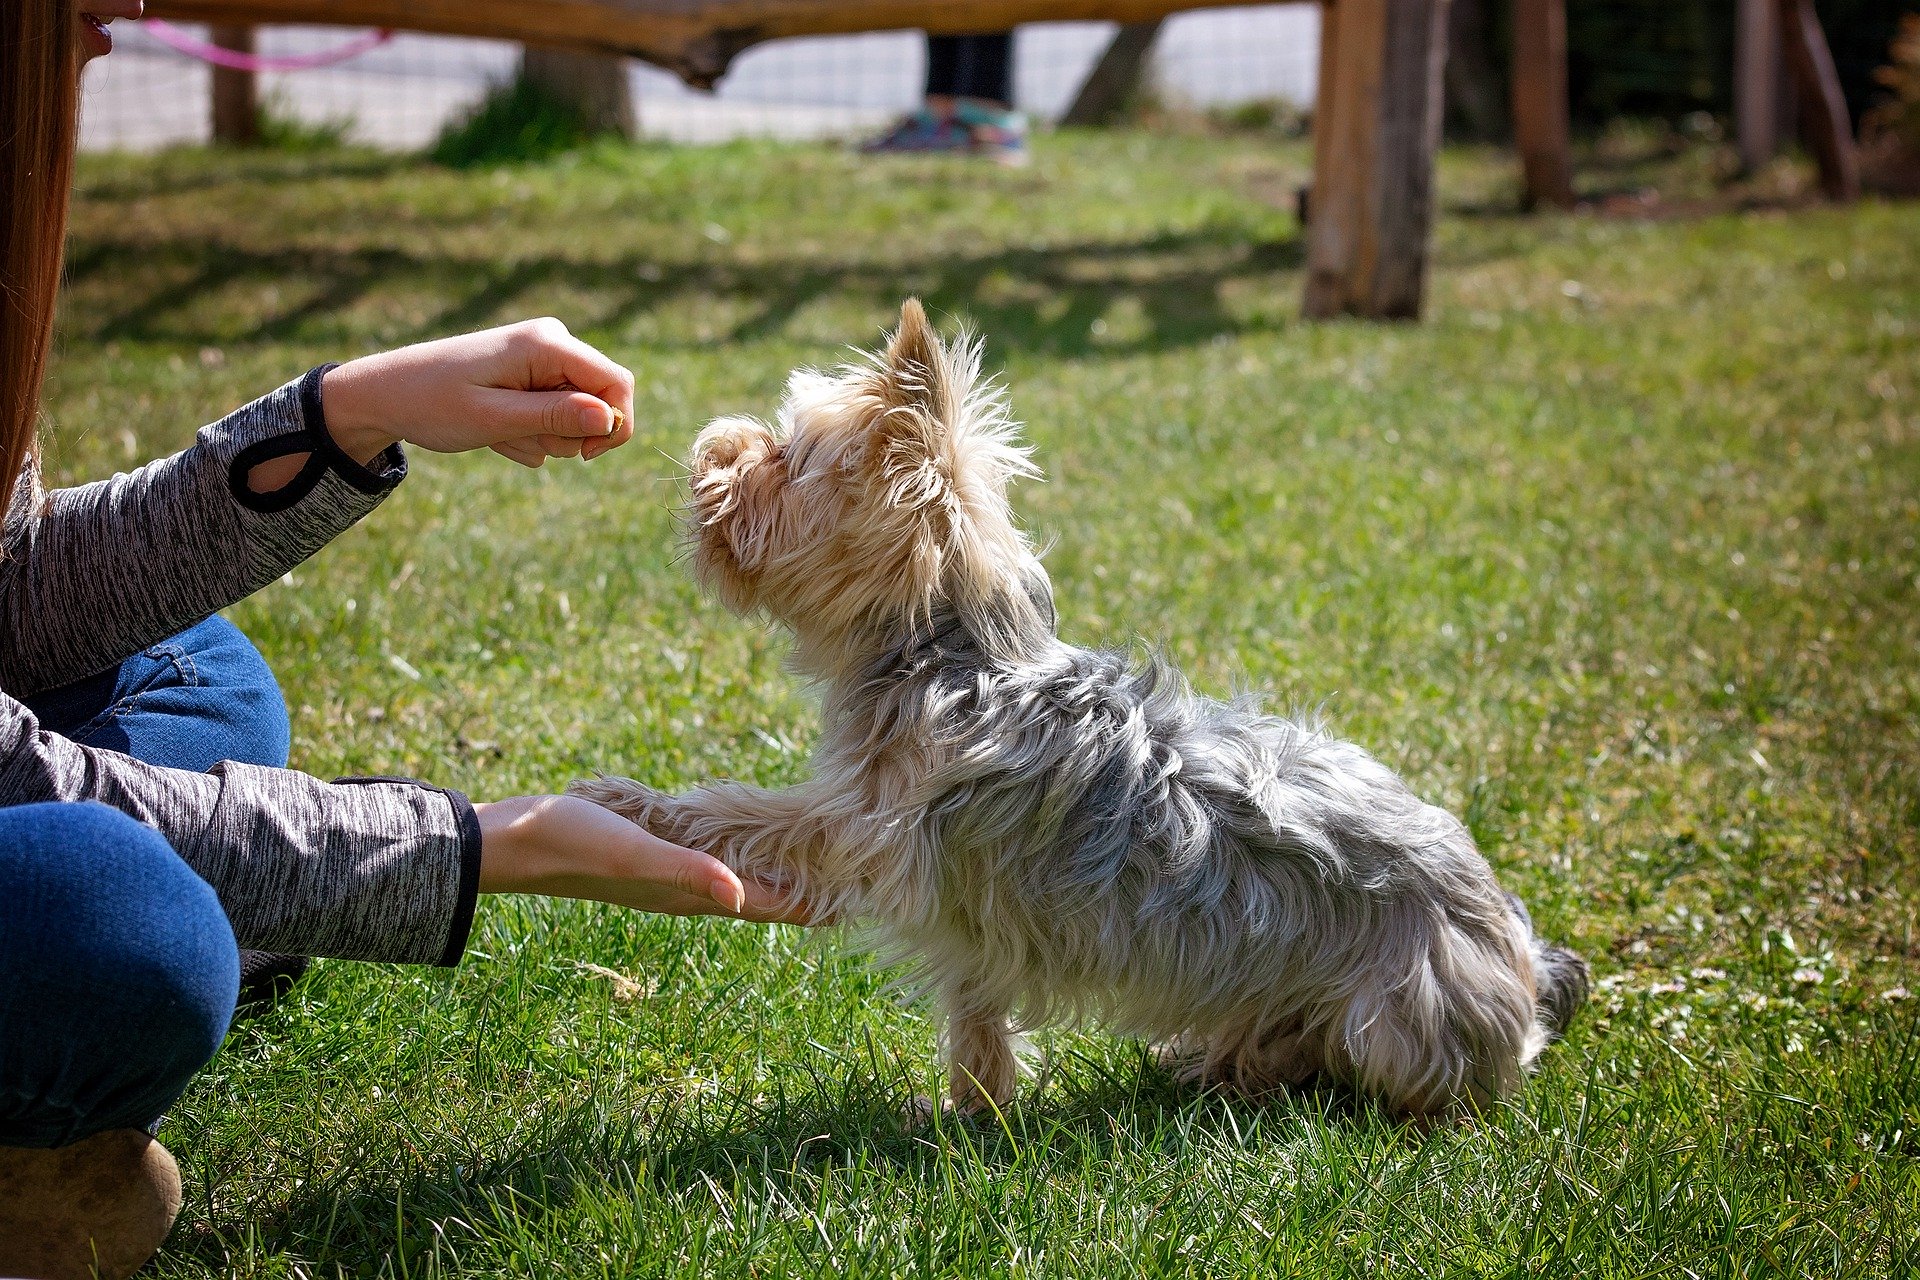 A small terrier being trained to give a paw by a person holding a treat. Image by Pezibear from Pixabay